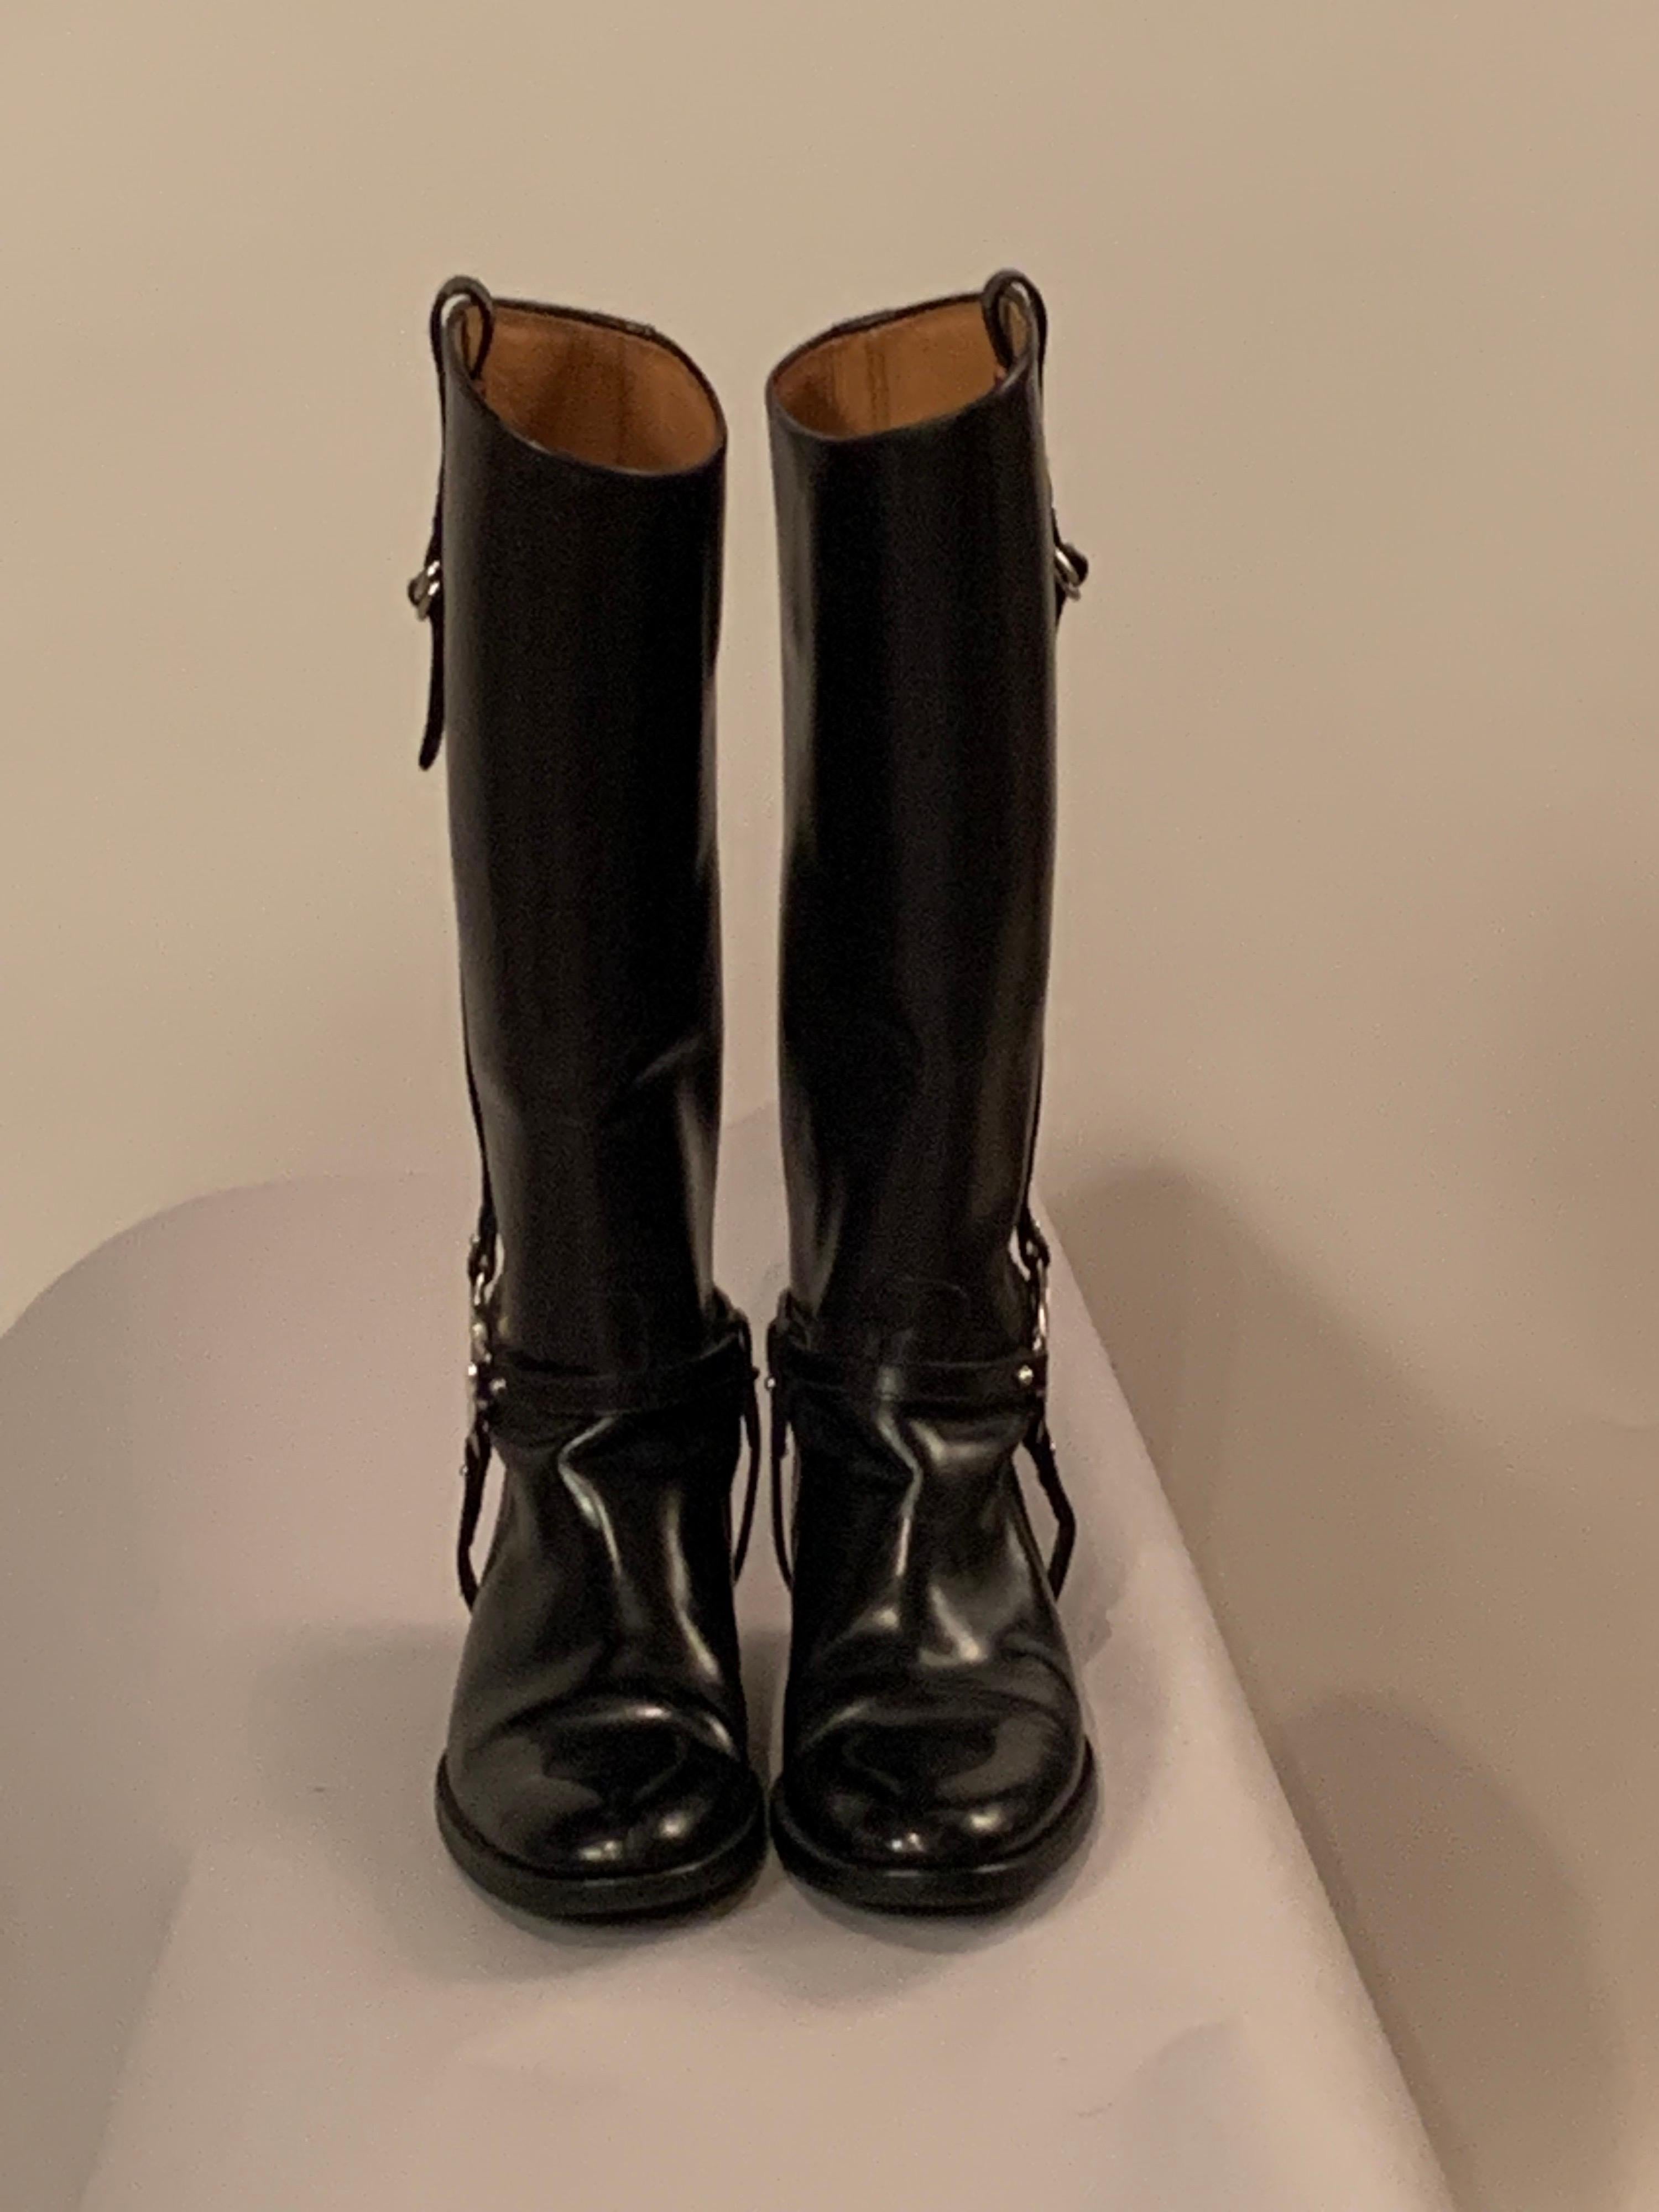 Classic equestrian boot style is used for the design of black leather Gucci boots.  There is a strap and buckle at the top of each boot, and the classic Gucci G logo is used on the straps at the ankle of each boot.  The red and green canvas ribbon